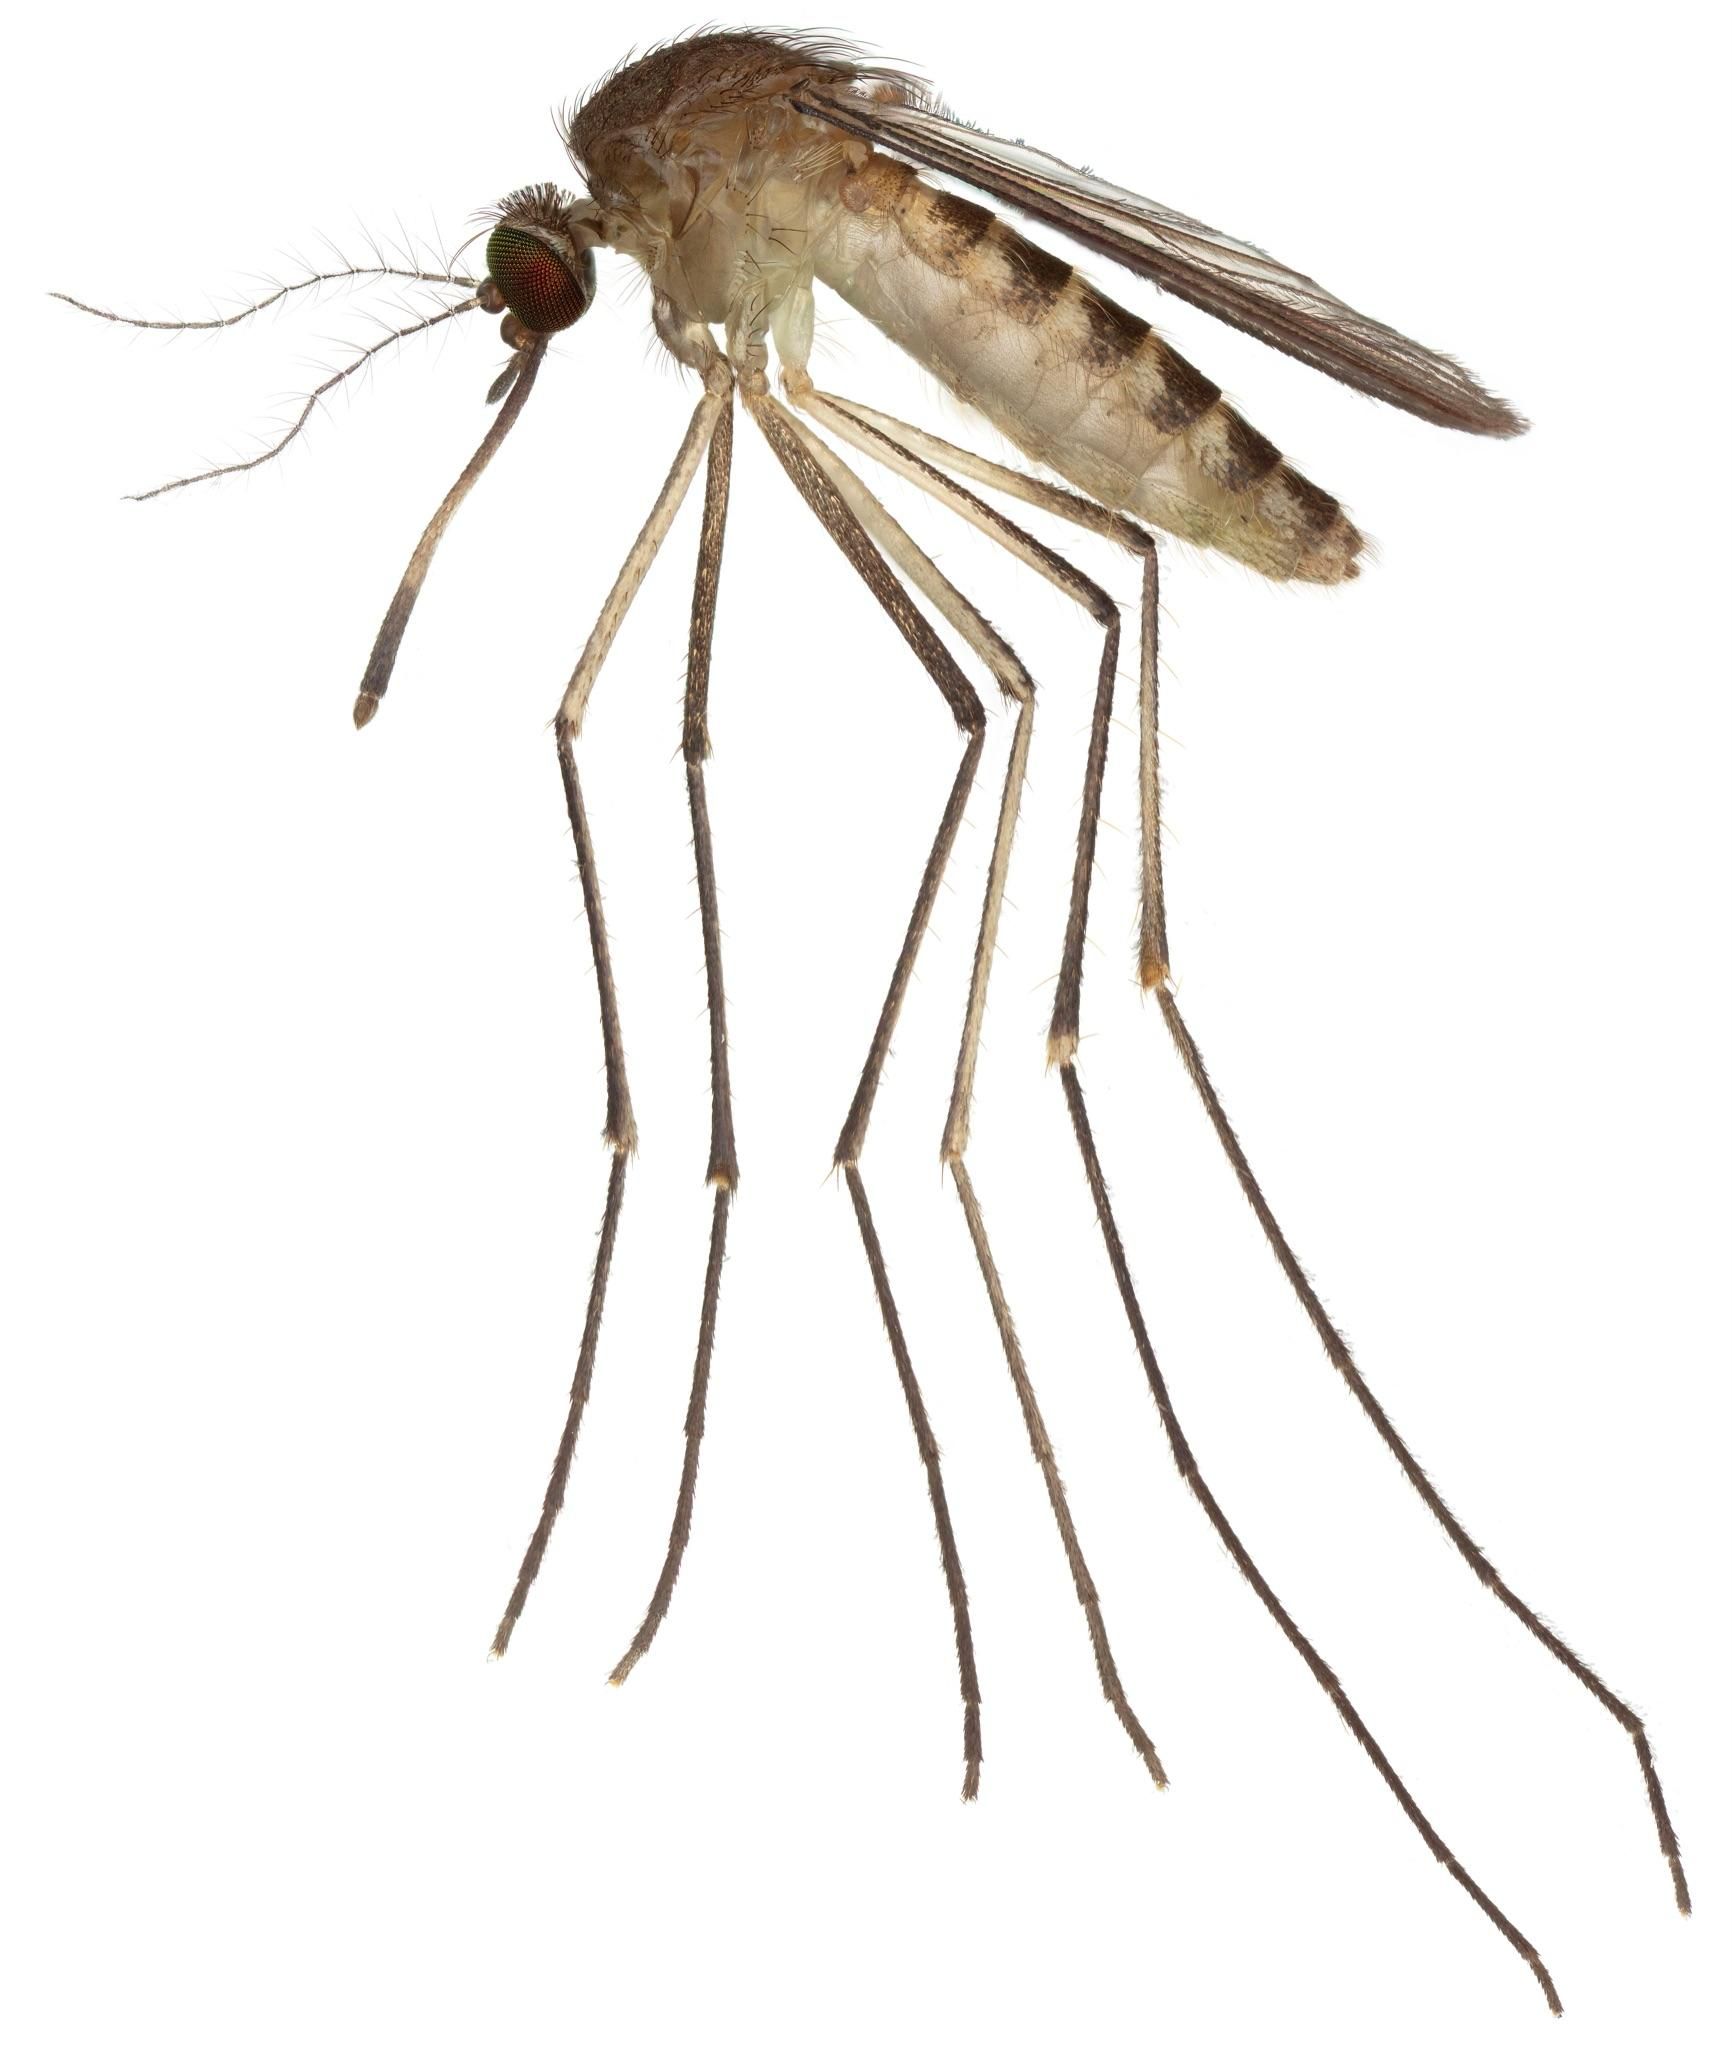 Adult female Culex nigripalpus, an important vector for West Nile virus in Florida and the southeastern United States, collected in Indian River County, Florida. 